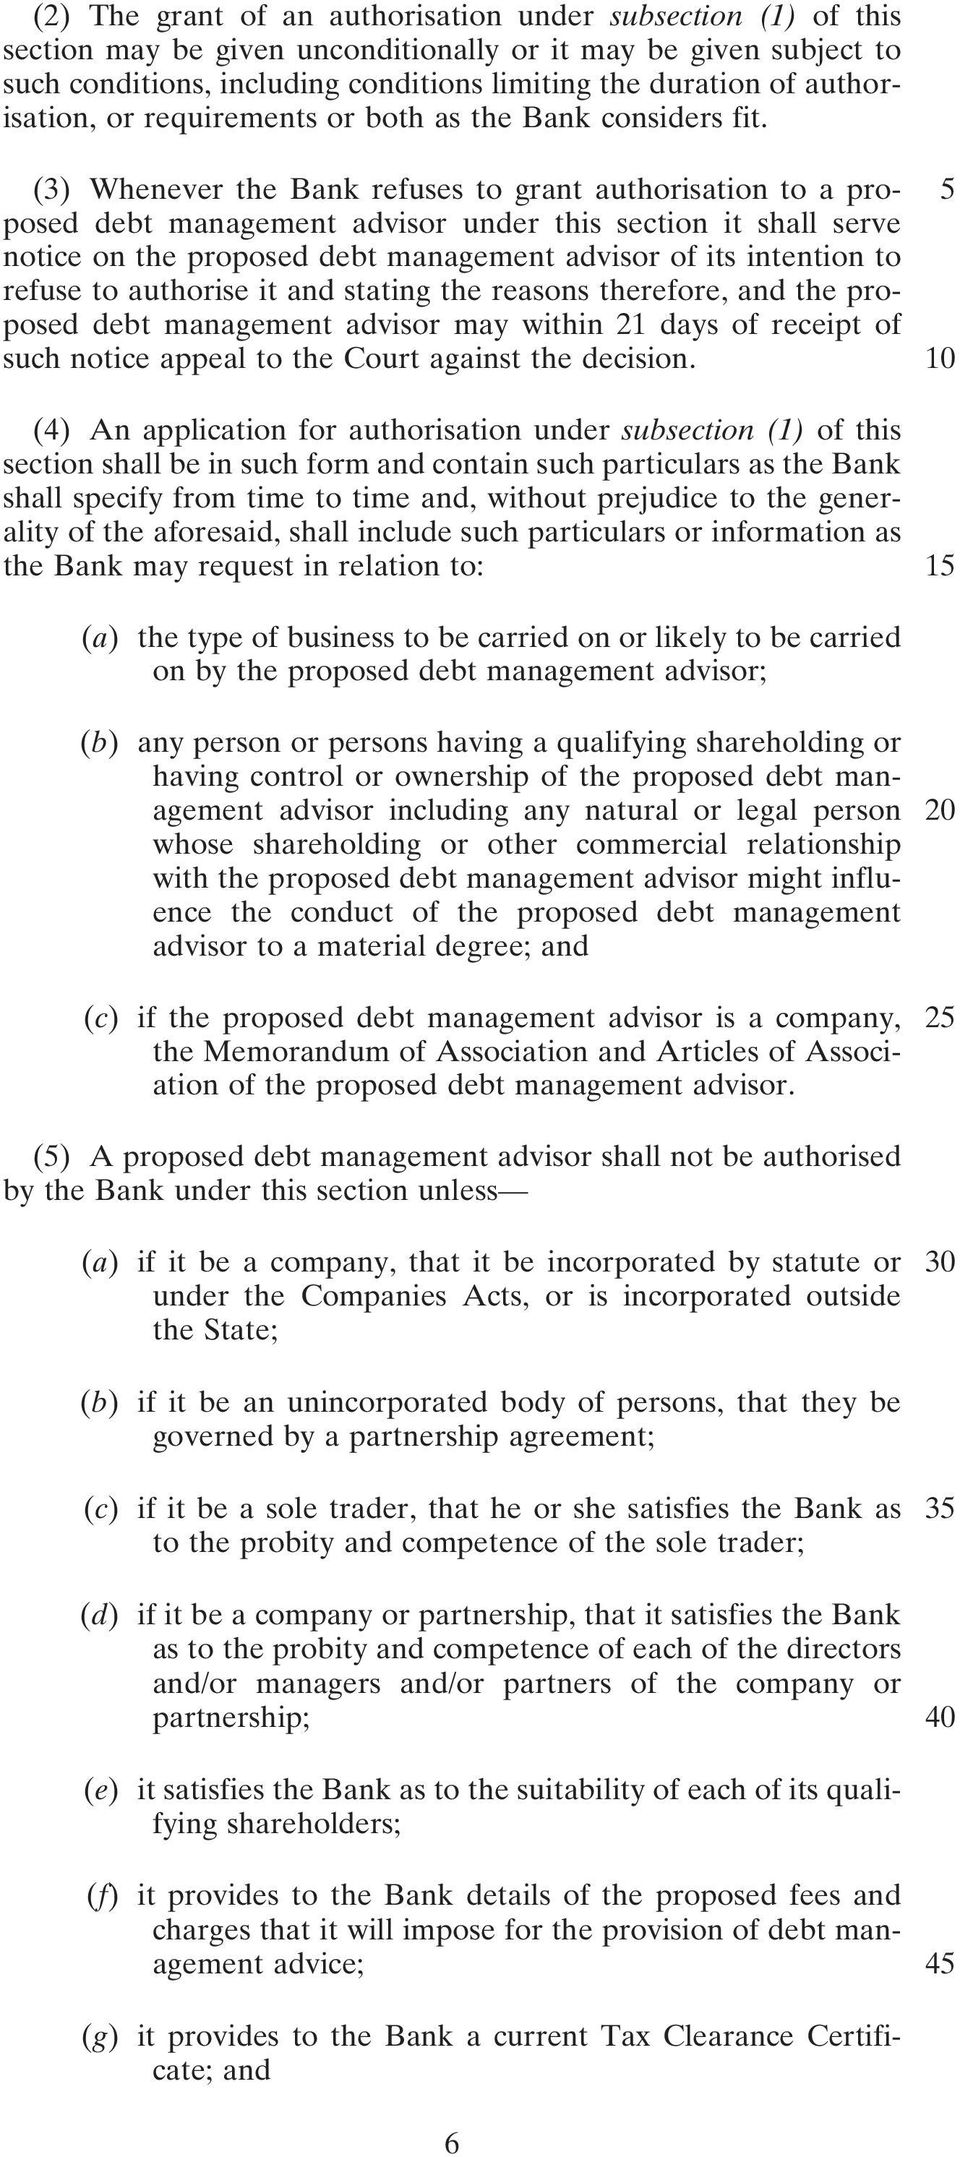 (3) Whenever the Bank refuses to grant authorisation to a pro- 5 posed debt management advisor under this section it shall serve notice on the proposed debt management advisor of its intention to